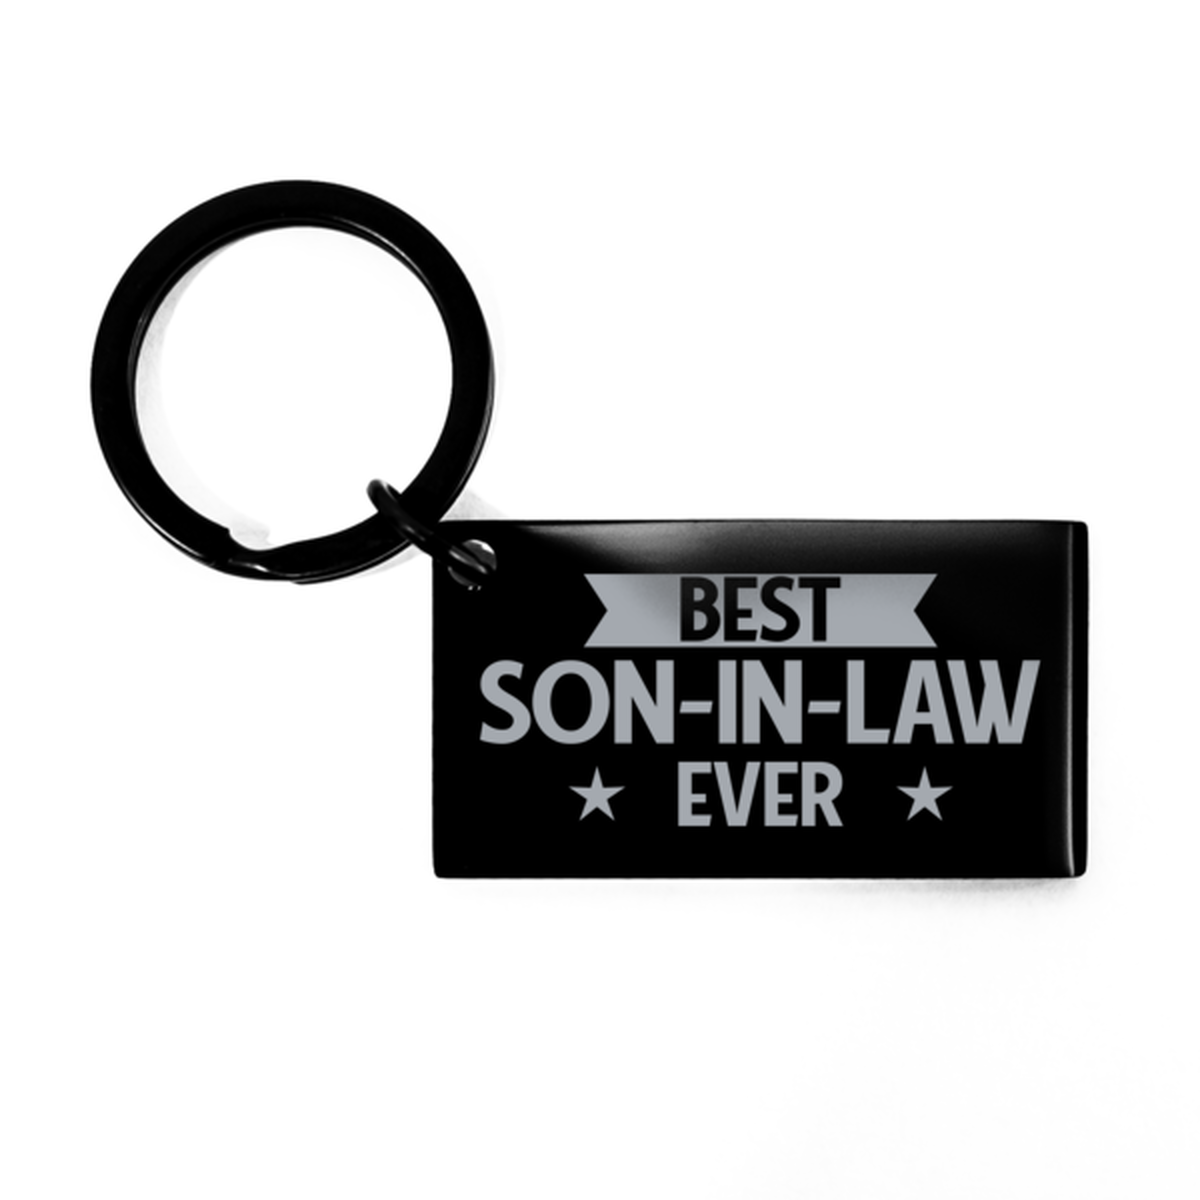 Best Son-in-law Ever Son-in-law Gifts, Funny Black Keychain For Son-in-law, Birthday Engraved Keyring Presents For Men